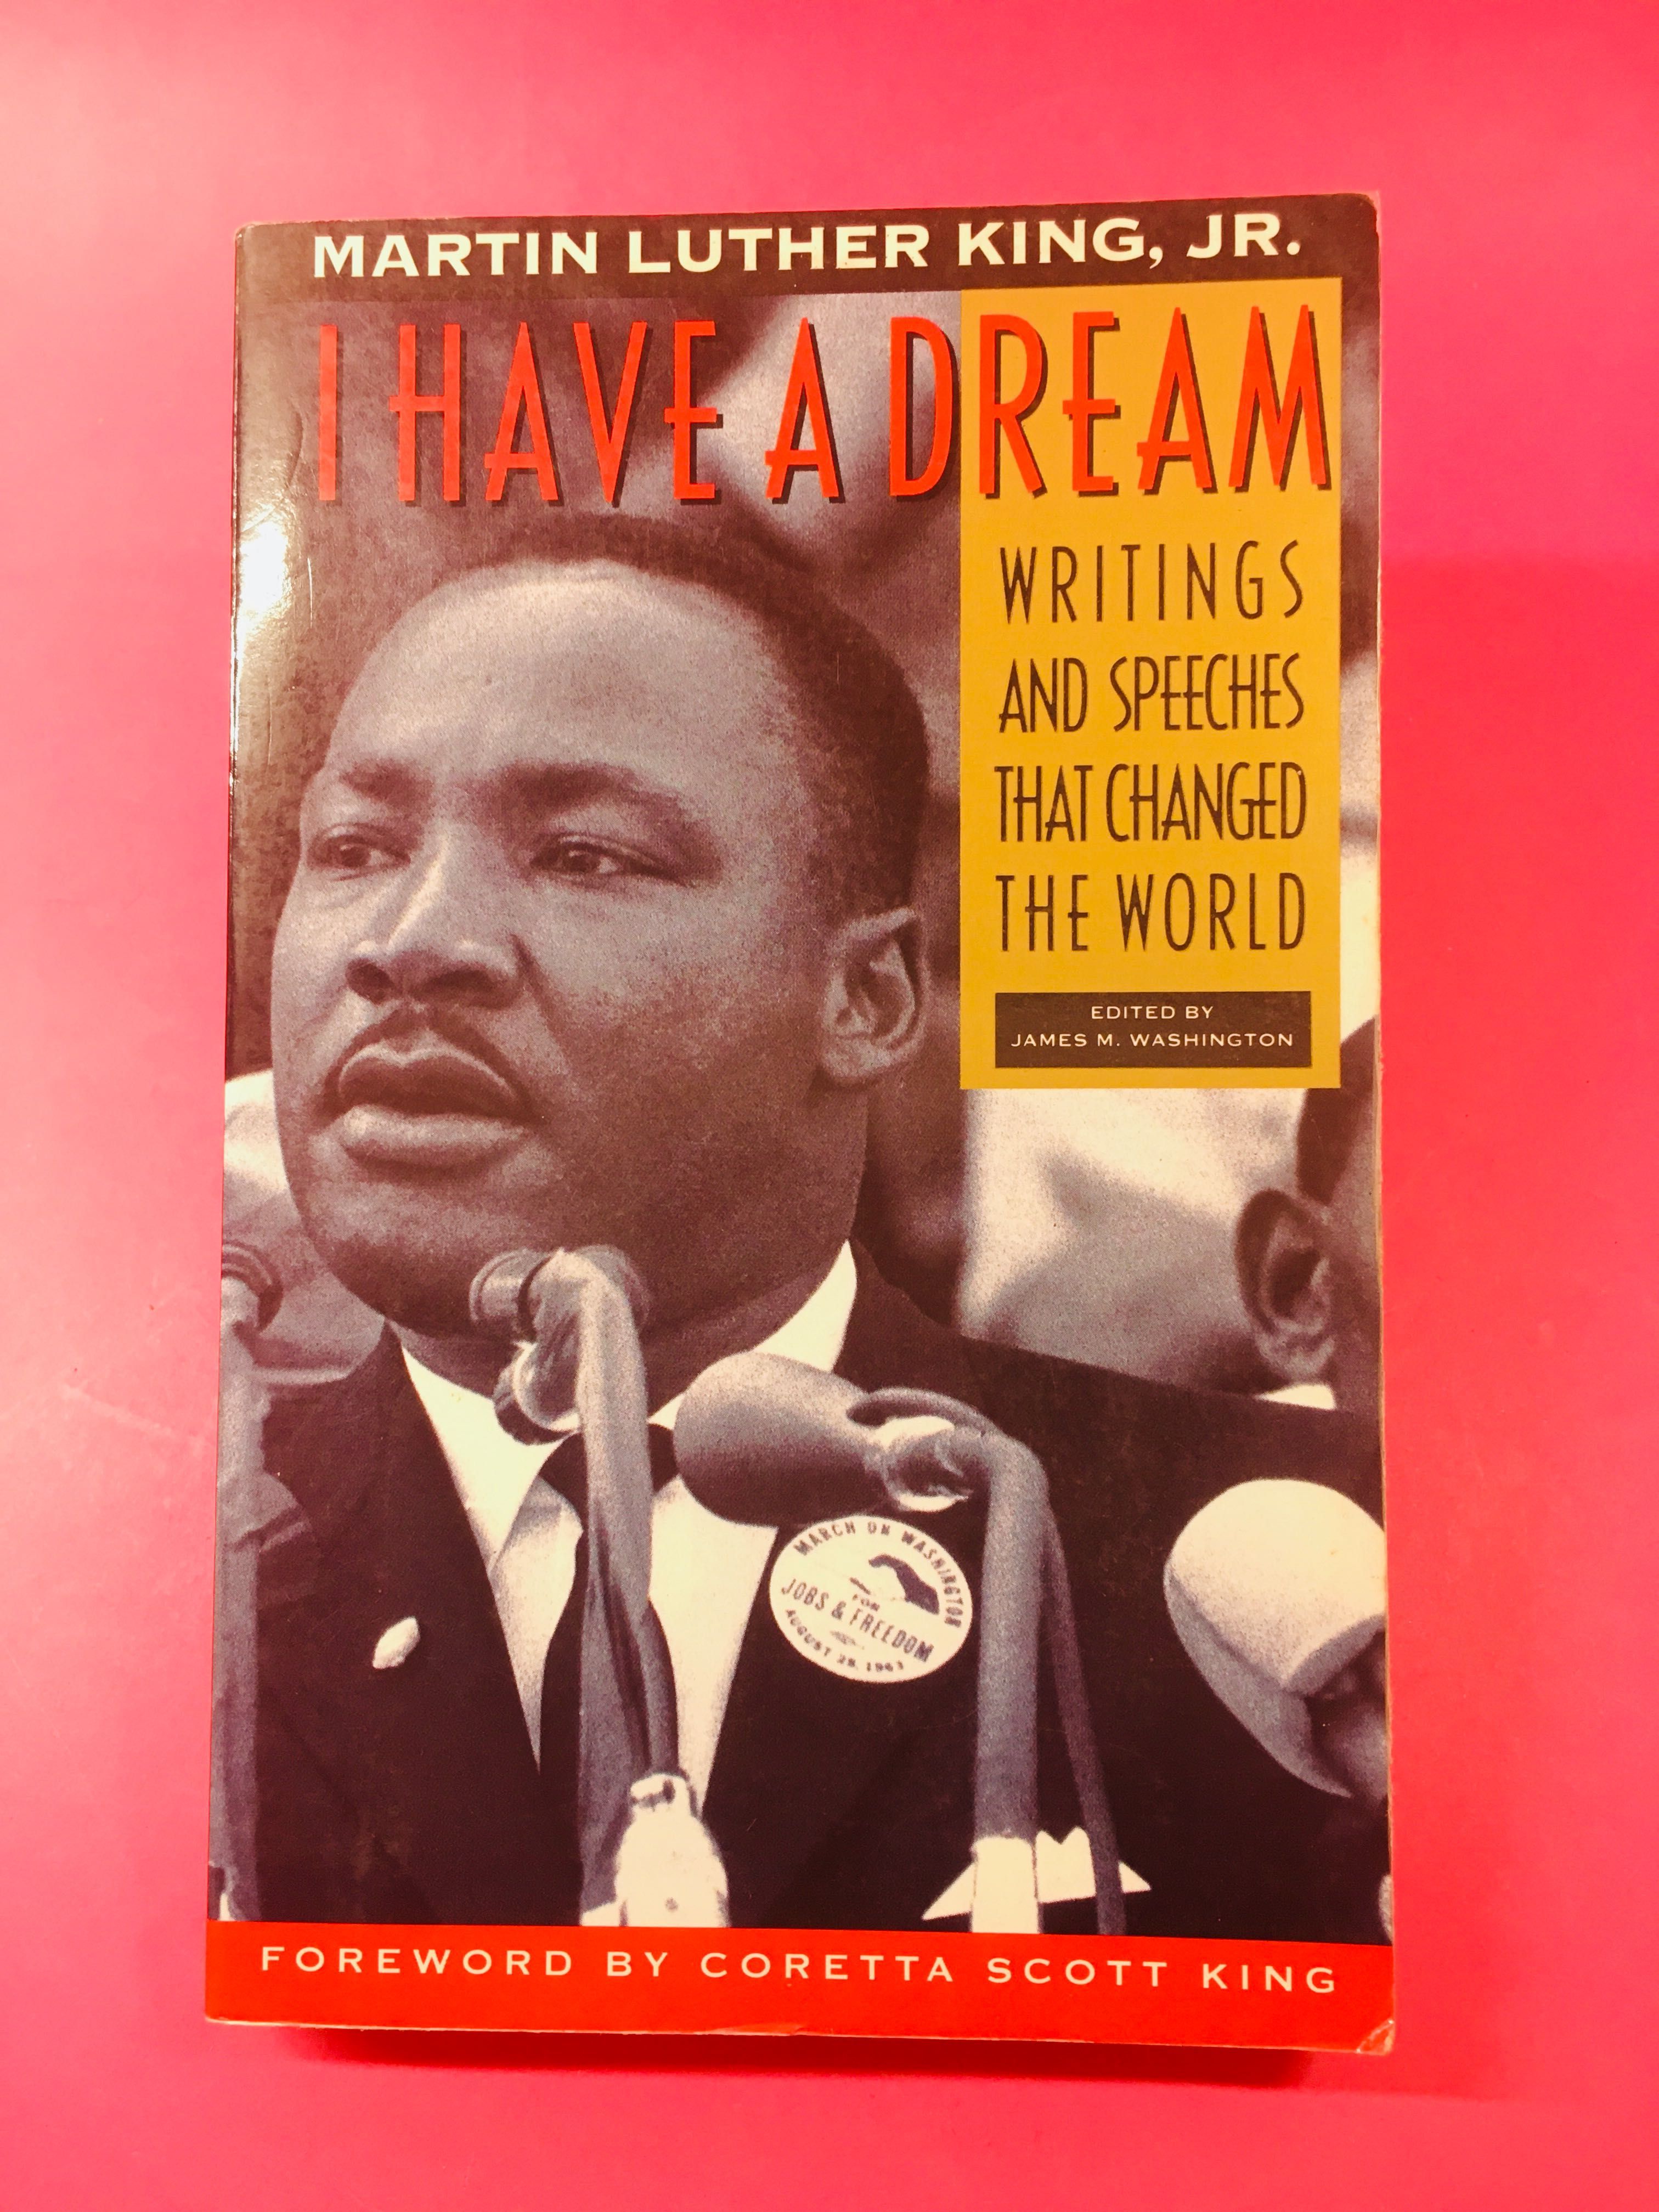 I Have a Dream - Martin Luther King Jr.